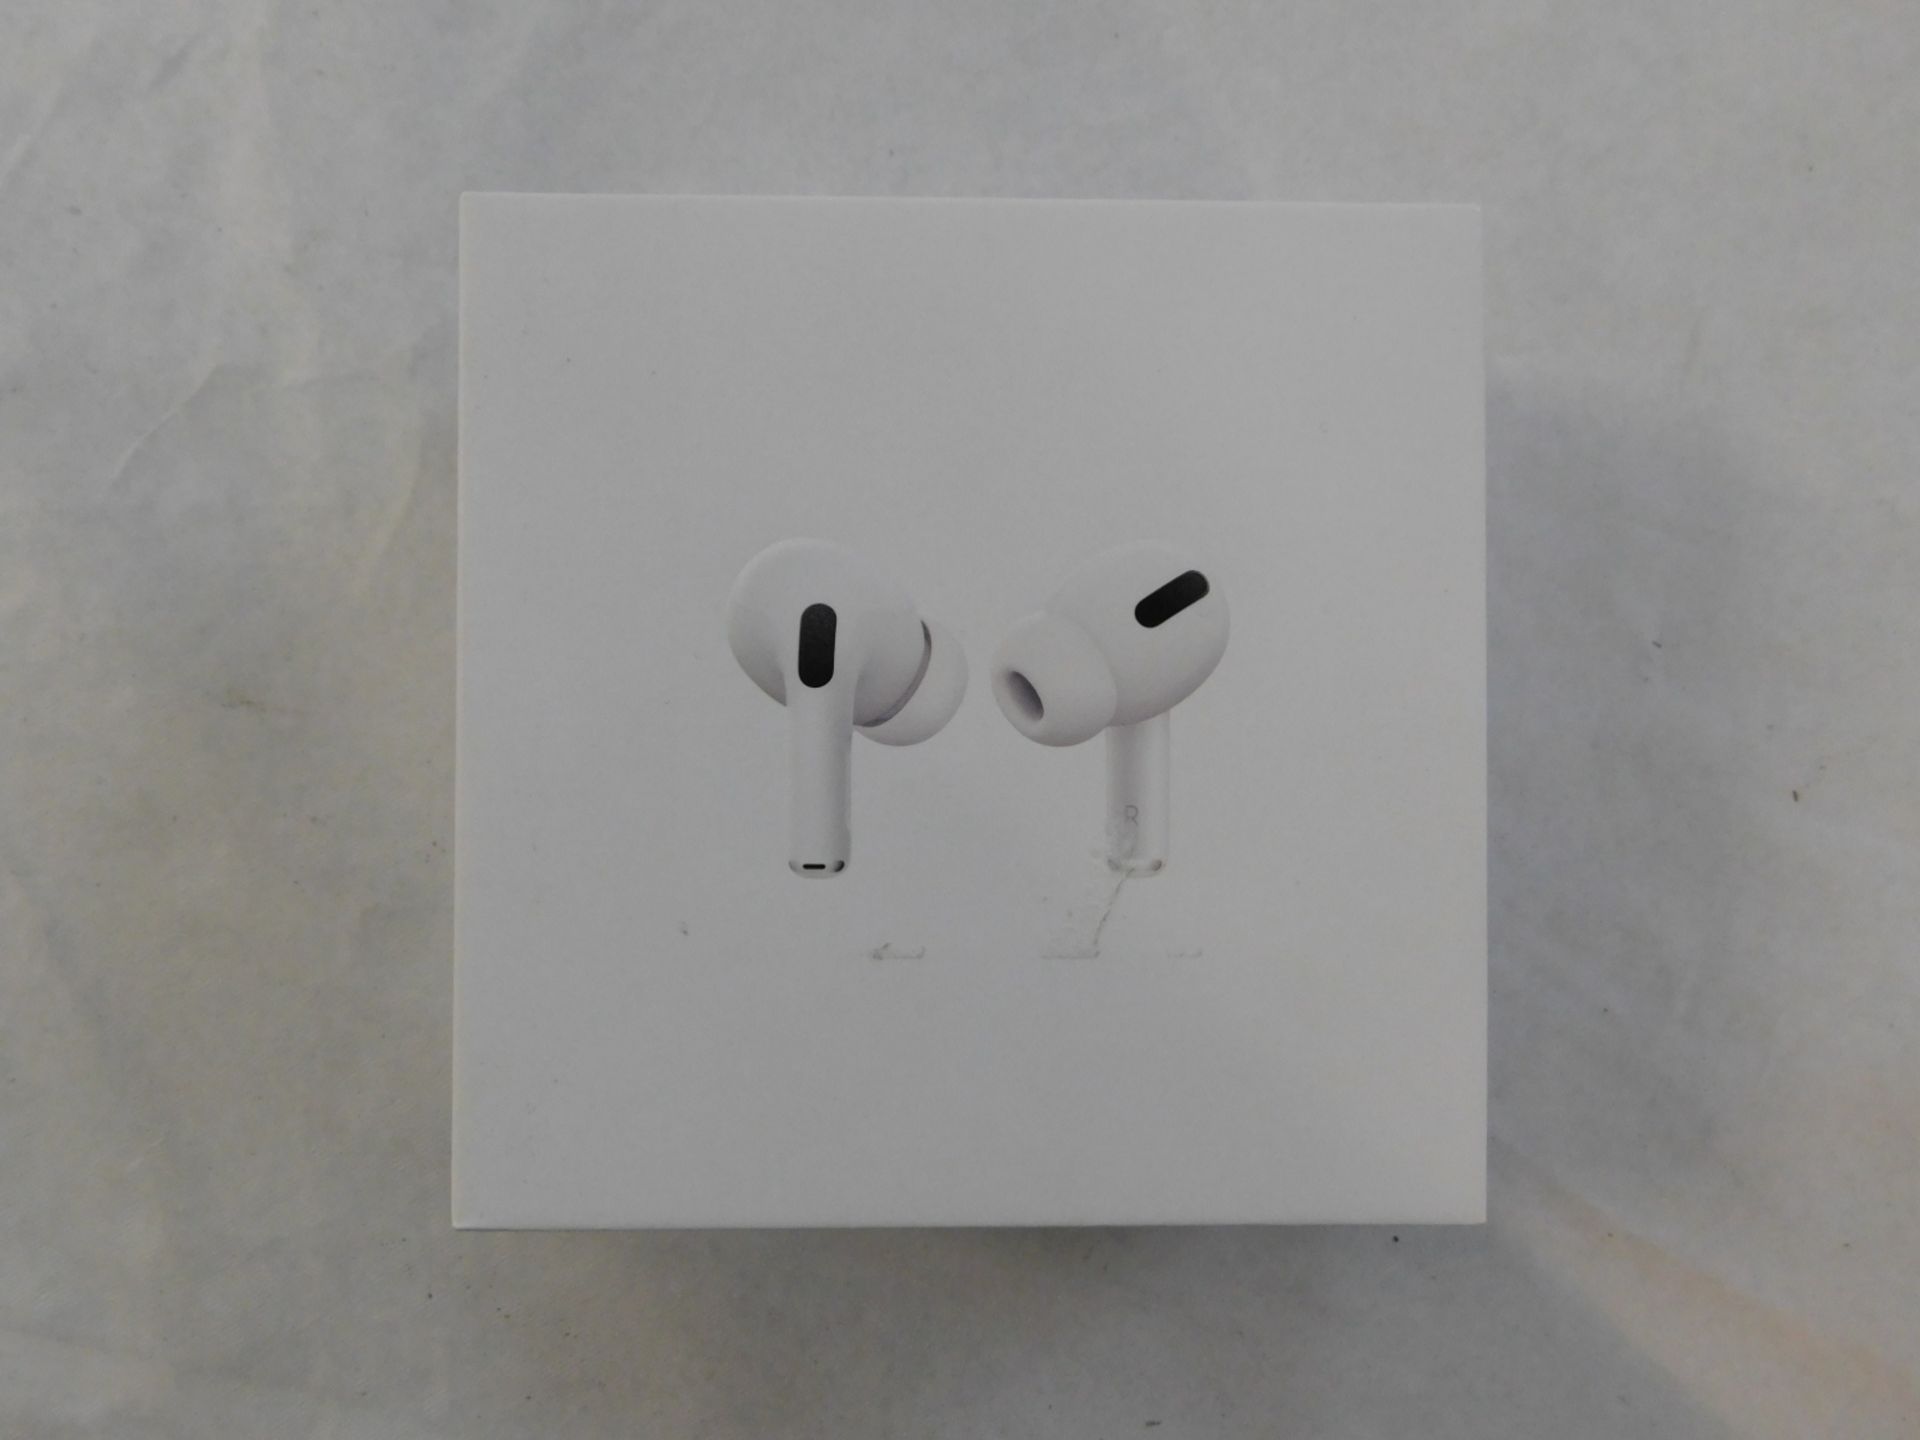 1 BOXED PAIR OF APPLE AIRPODS PRO BLUETOOTH EARPHONES WITH WIRELESS CHARGING CASE RRP Â£249.99